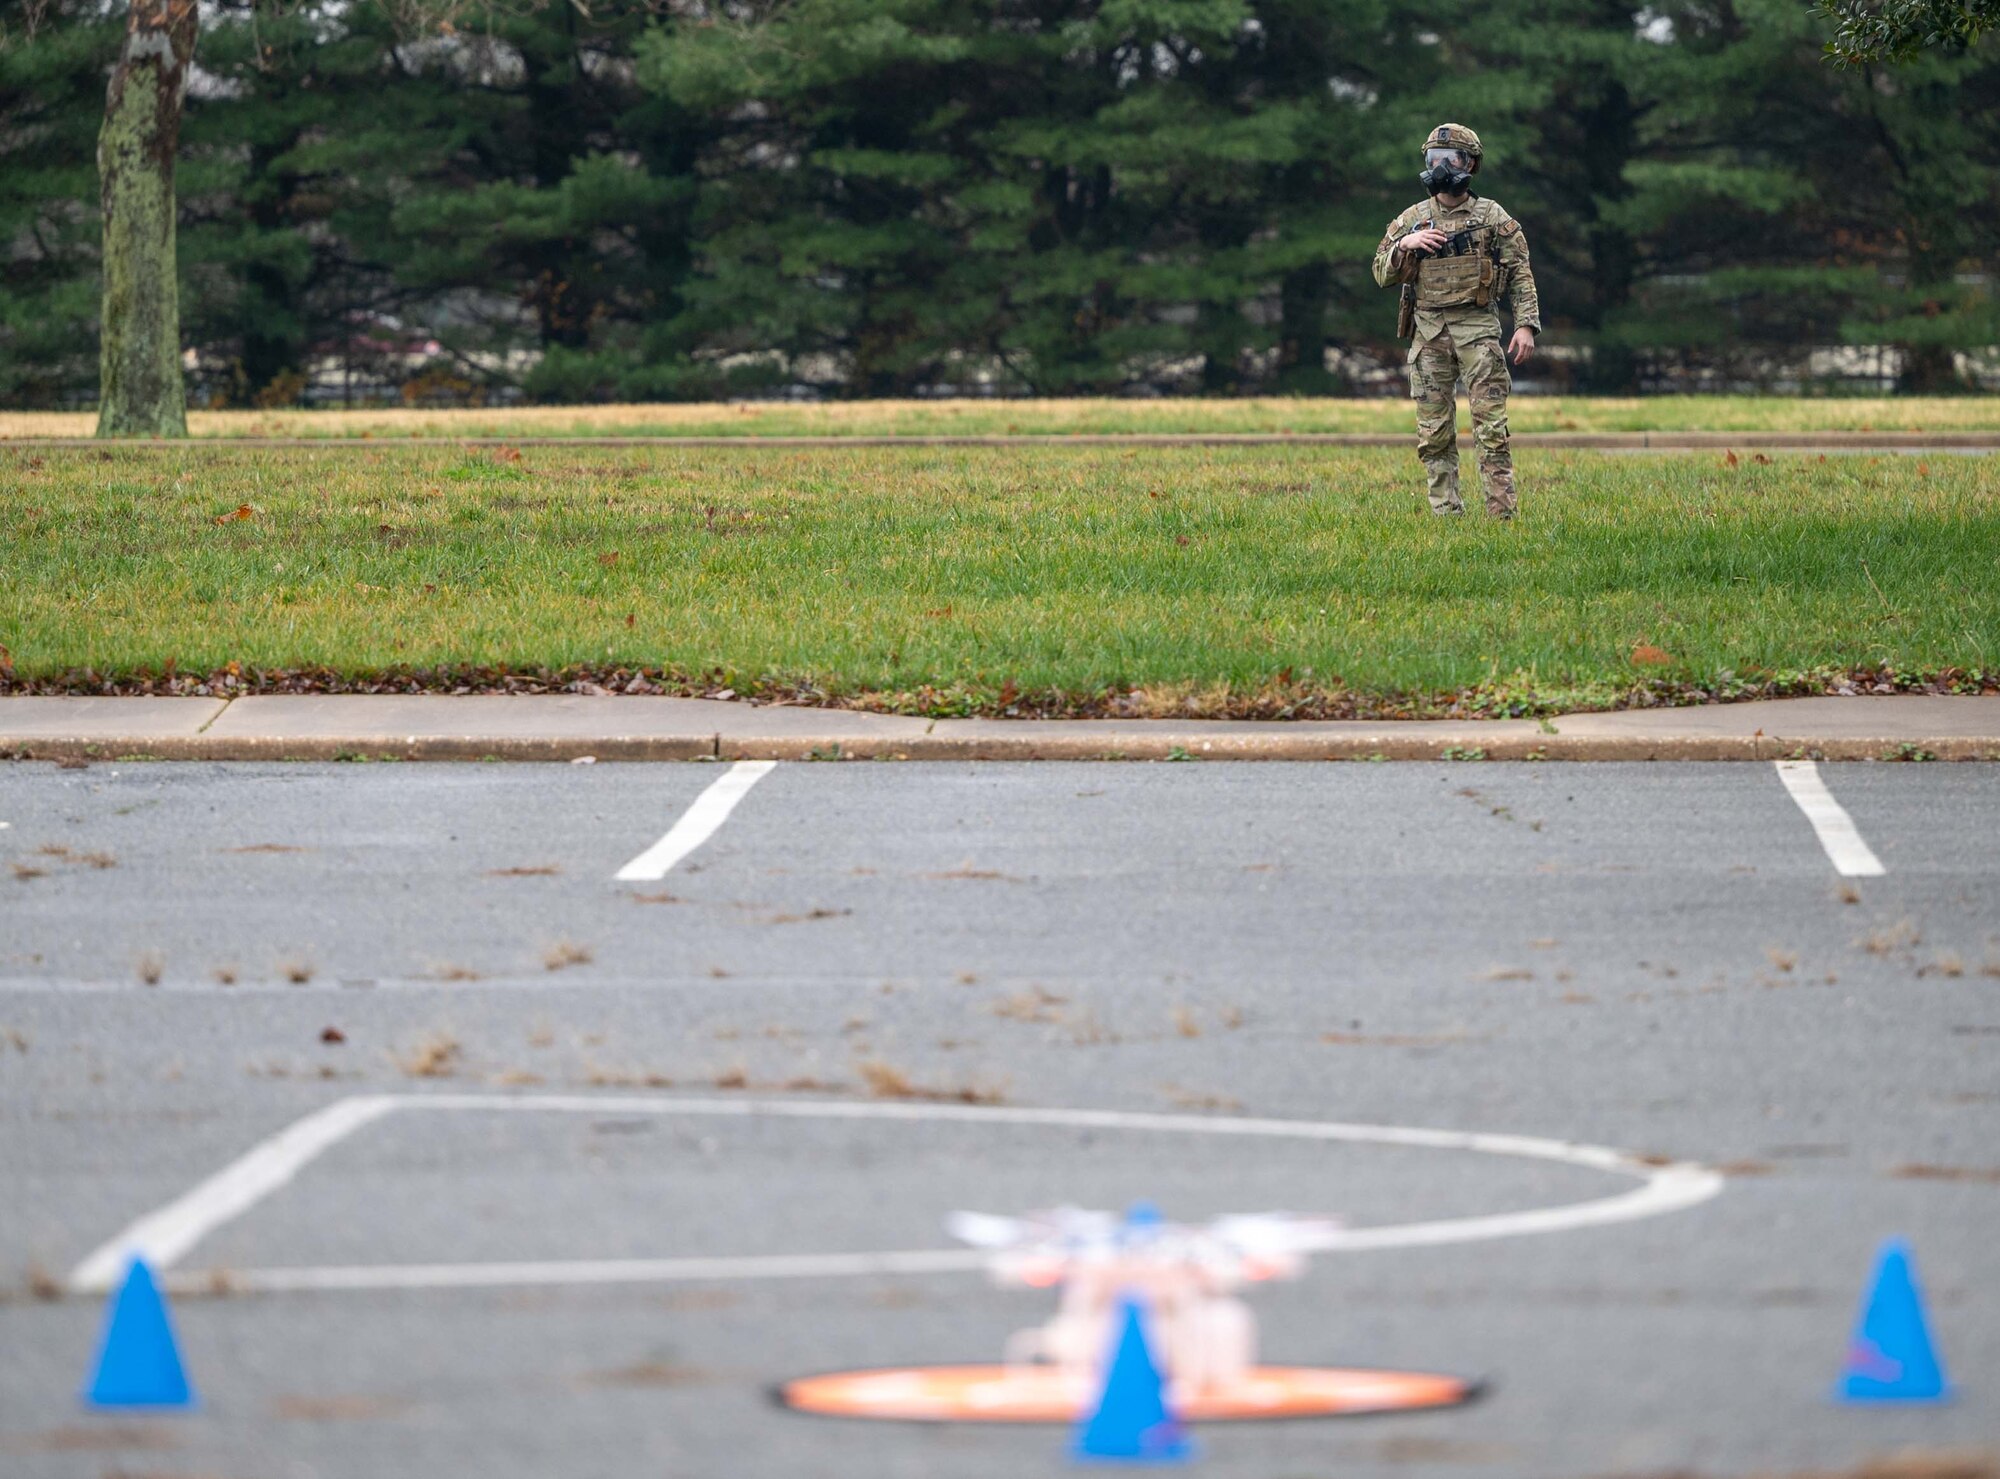 Staff Sgt. Jordan Meadow, 436th Security Forces Squadron force response leader, cordons an unidentified explosive device during a major accident response exercise at Dover Air Force Base, Delaware, Dec. 7, 2022. The three-day exercise tested the response capabilities of Team Dover through various scenarios in an effort to strengthen their ability to provide rapid-global mobility in challenging conditions. (U.S. Air Force photo by Senior Airman Faith Barron)